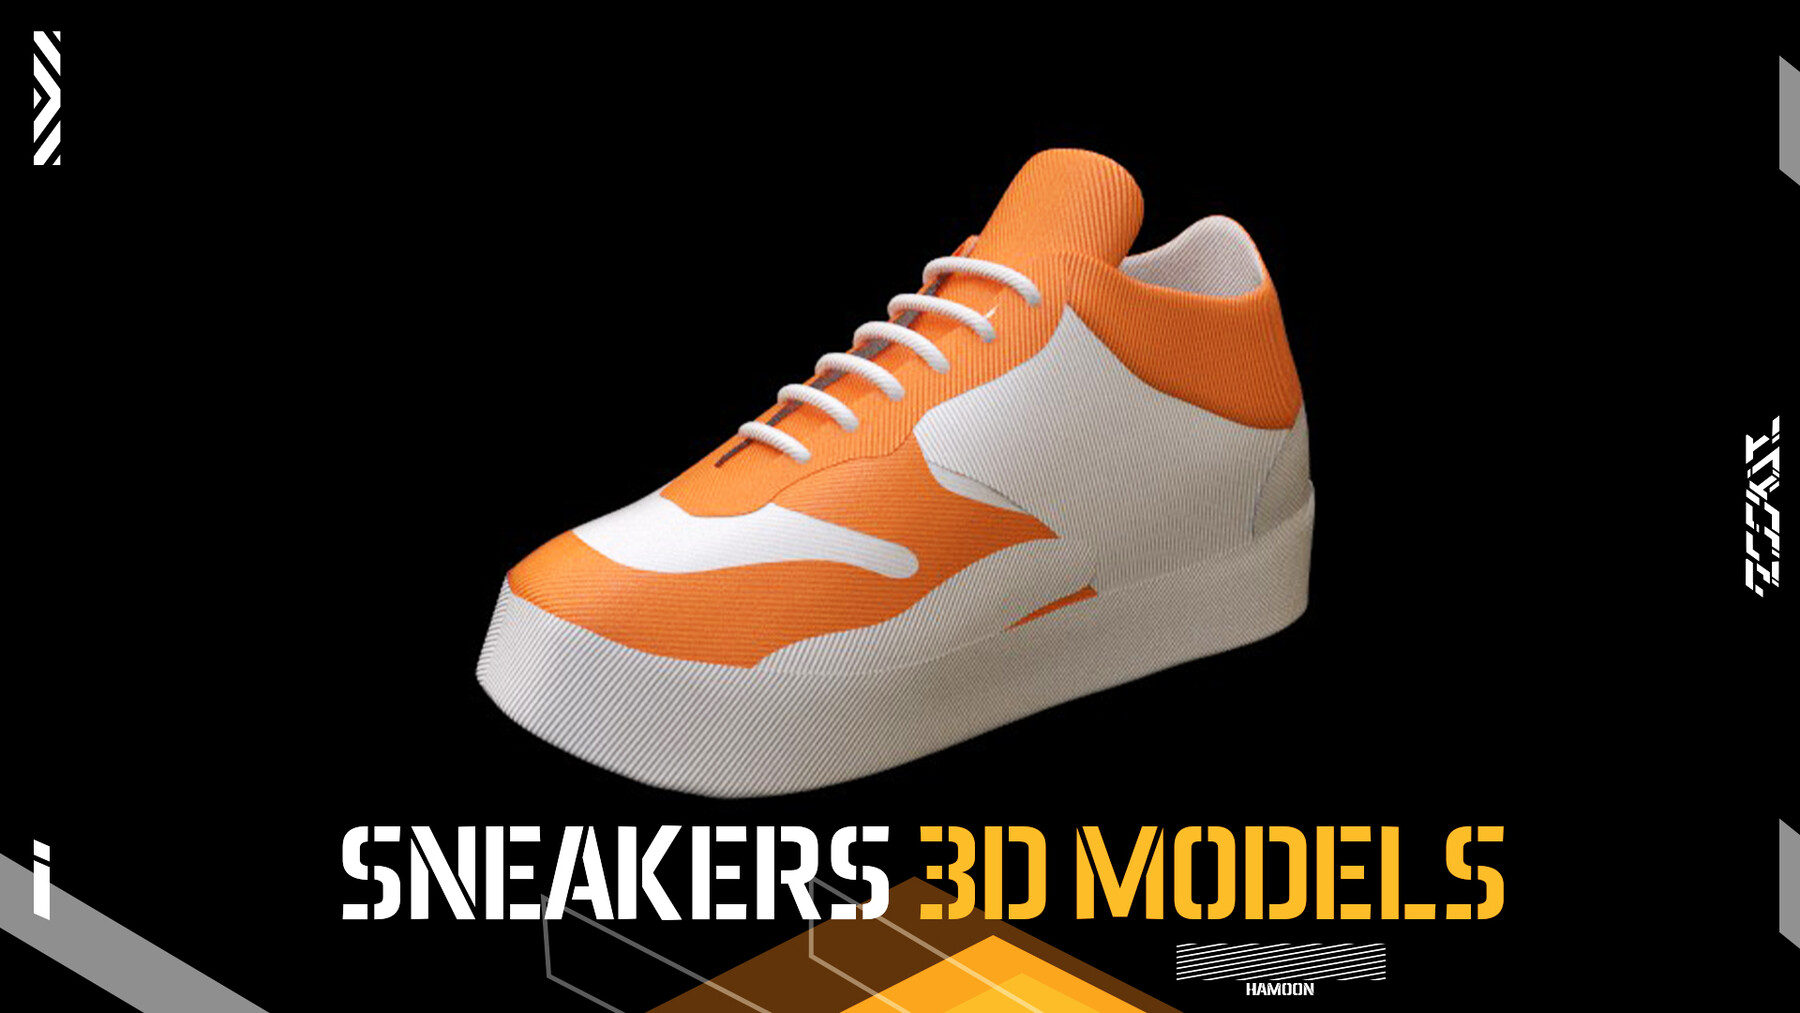 Classic Sneakers 3D Model For Procreate | lupon.gov.ph